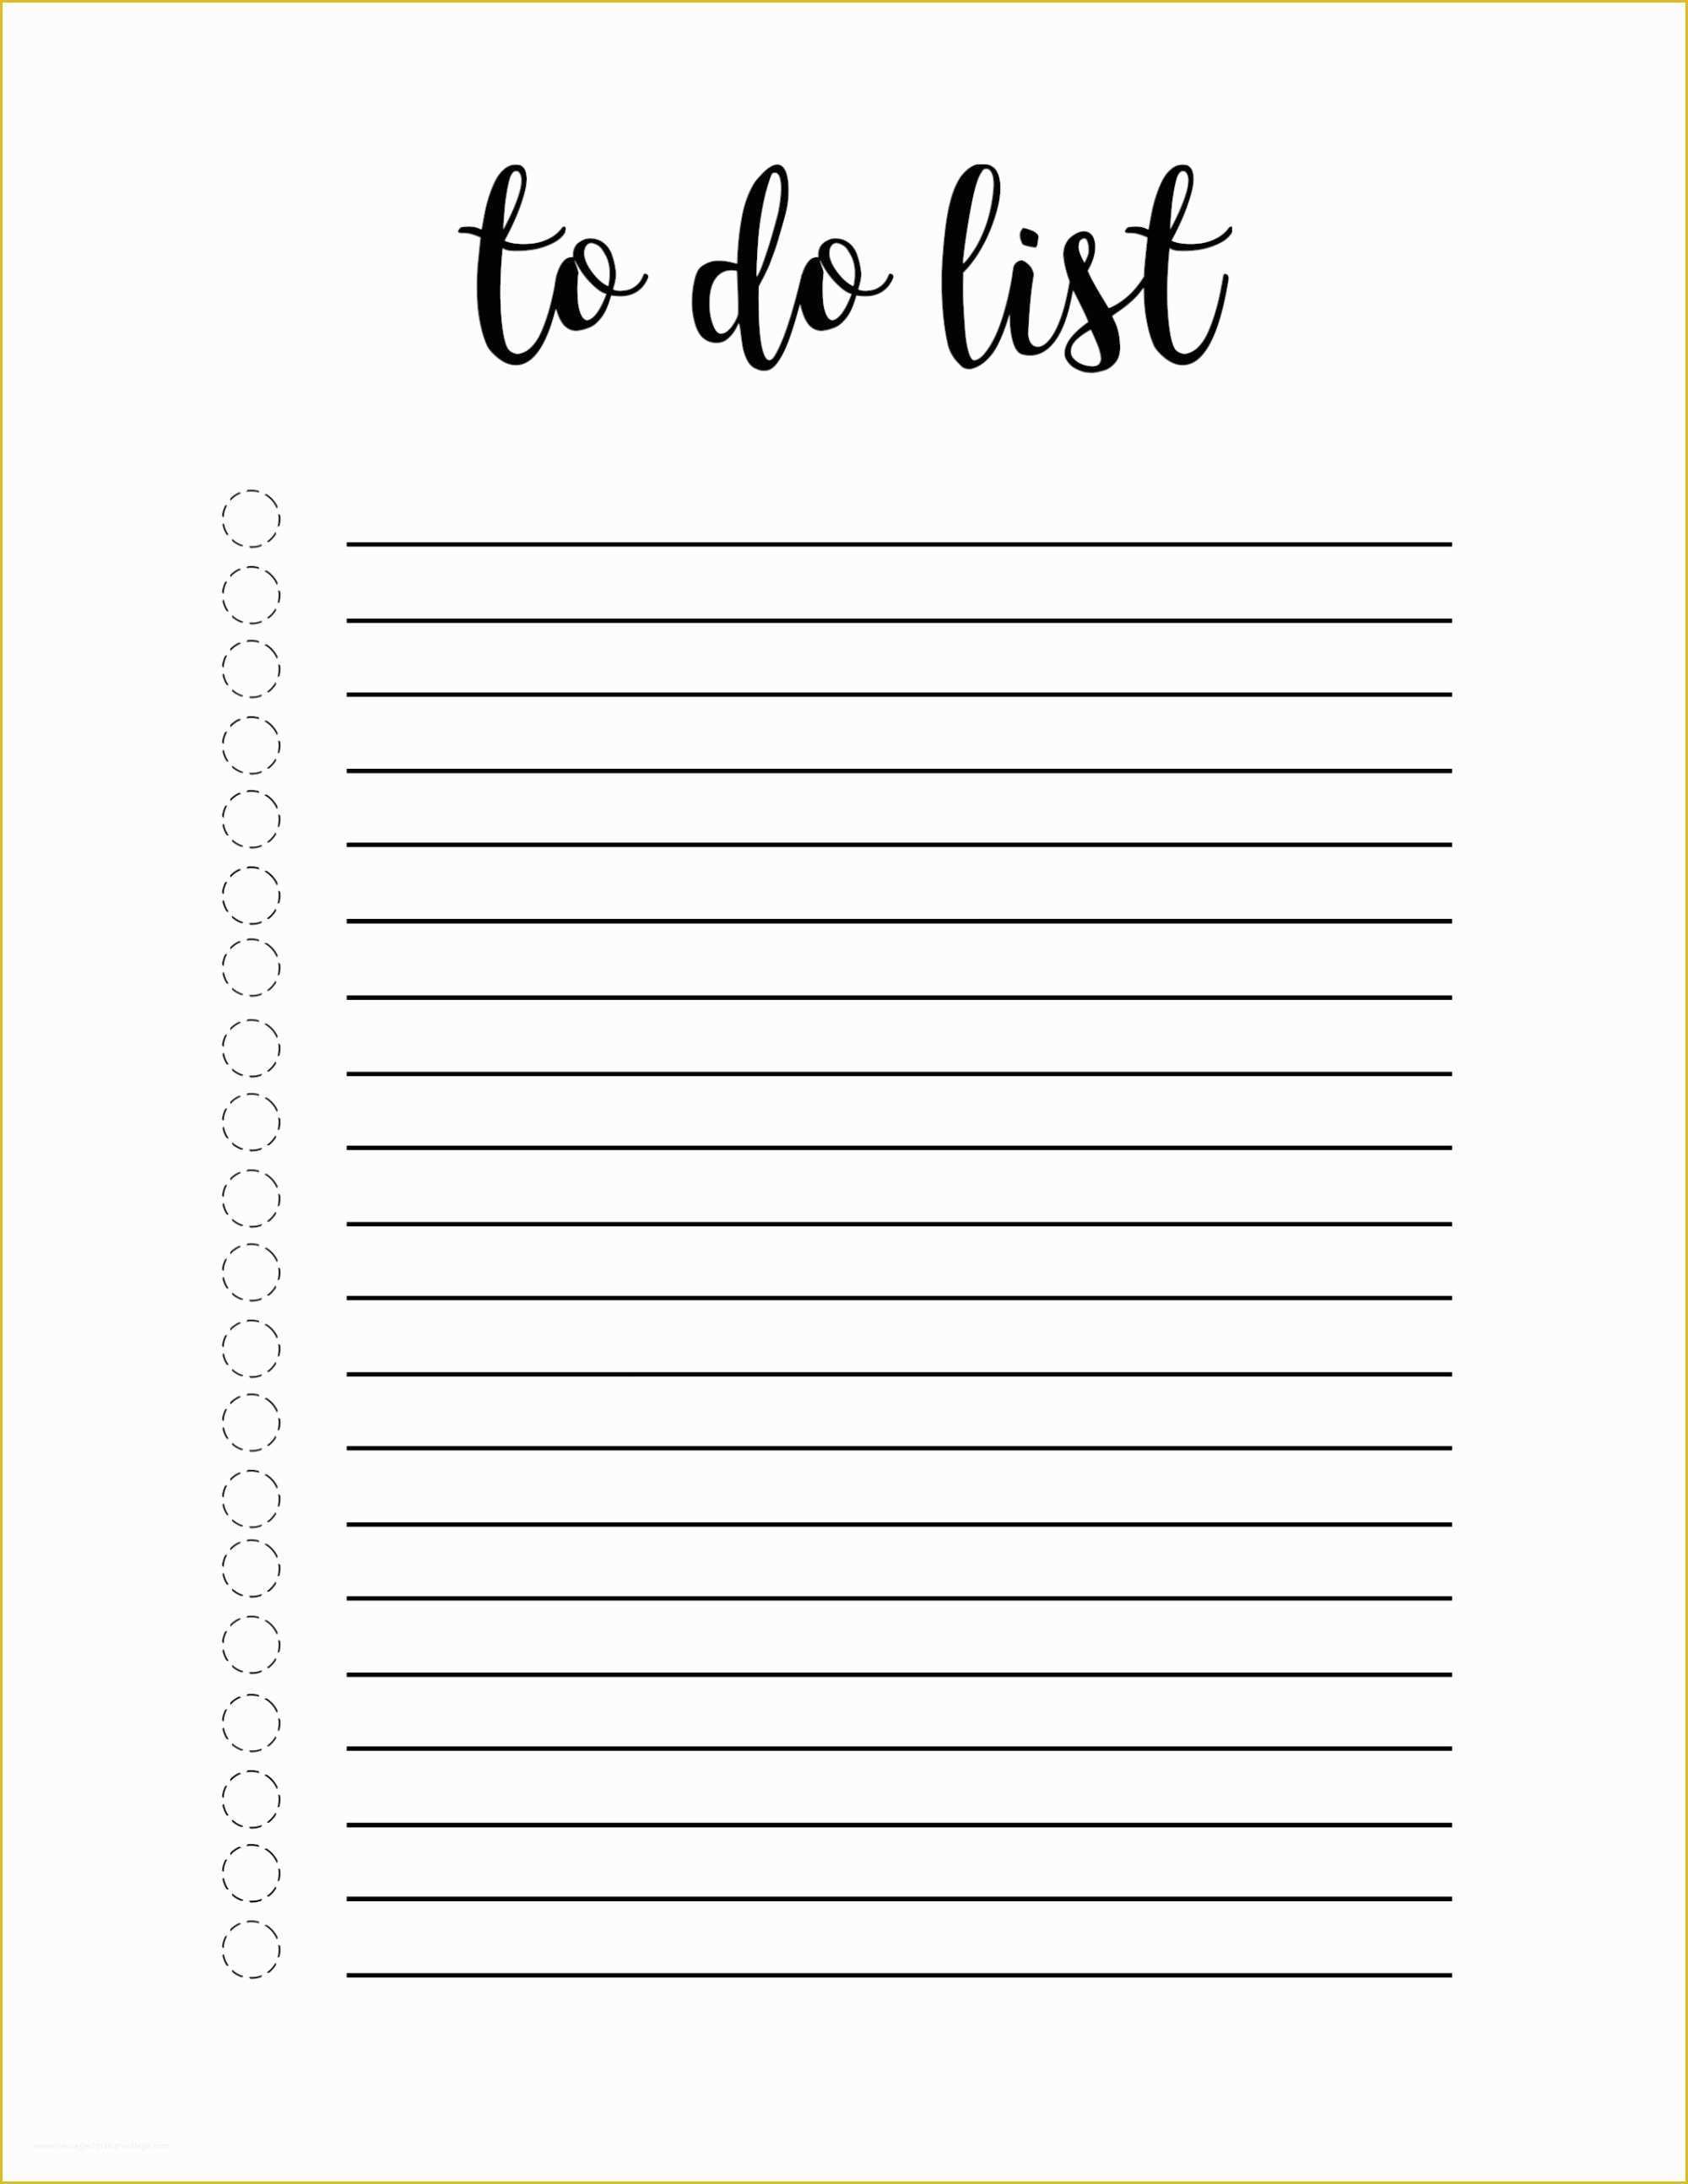 Free Roster Templates Printable Of Free Printable to Do List Template Making Notebooks